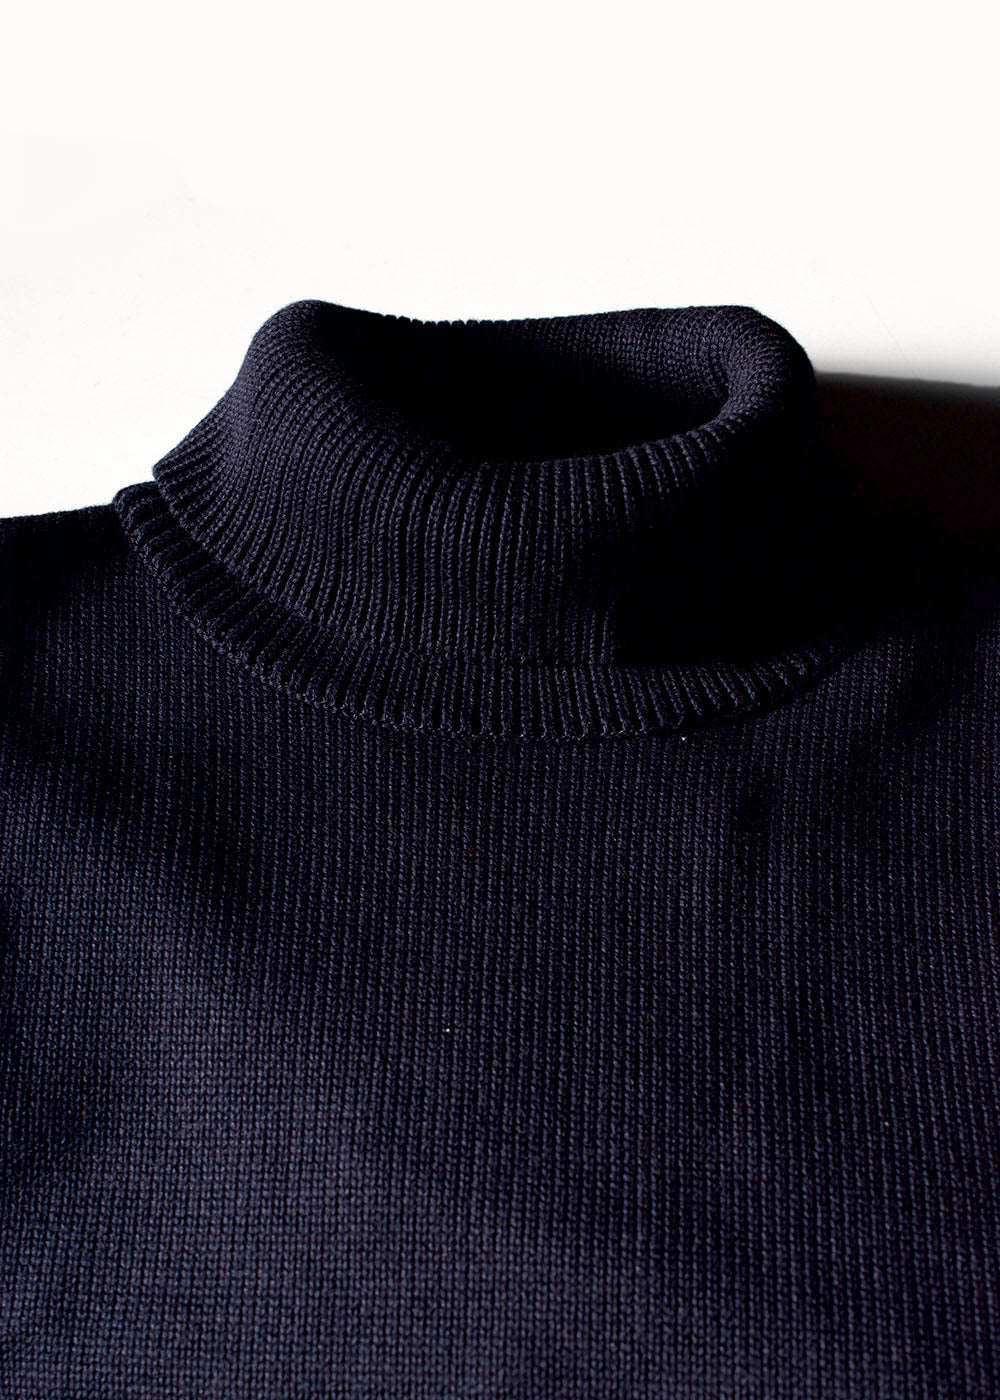 CLASSIC HIGH NECK SWEATER - NAVY - May club